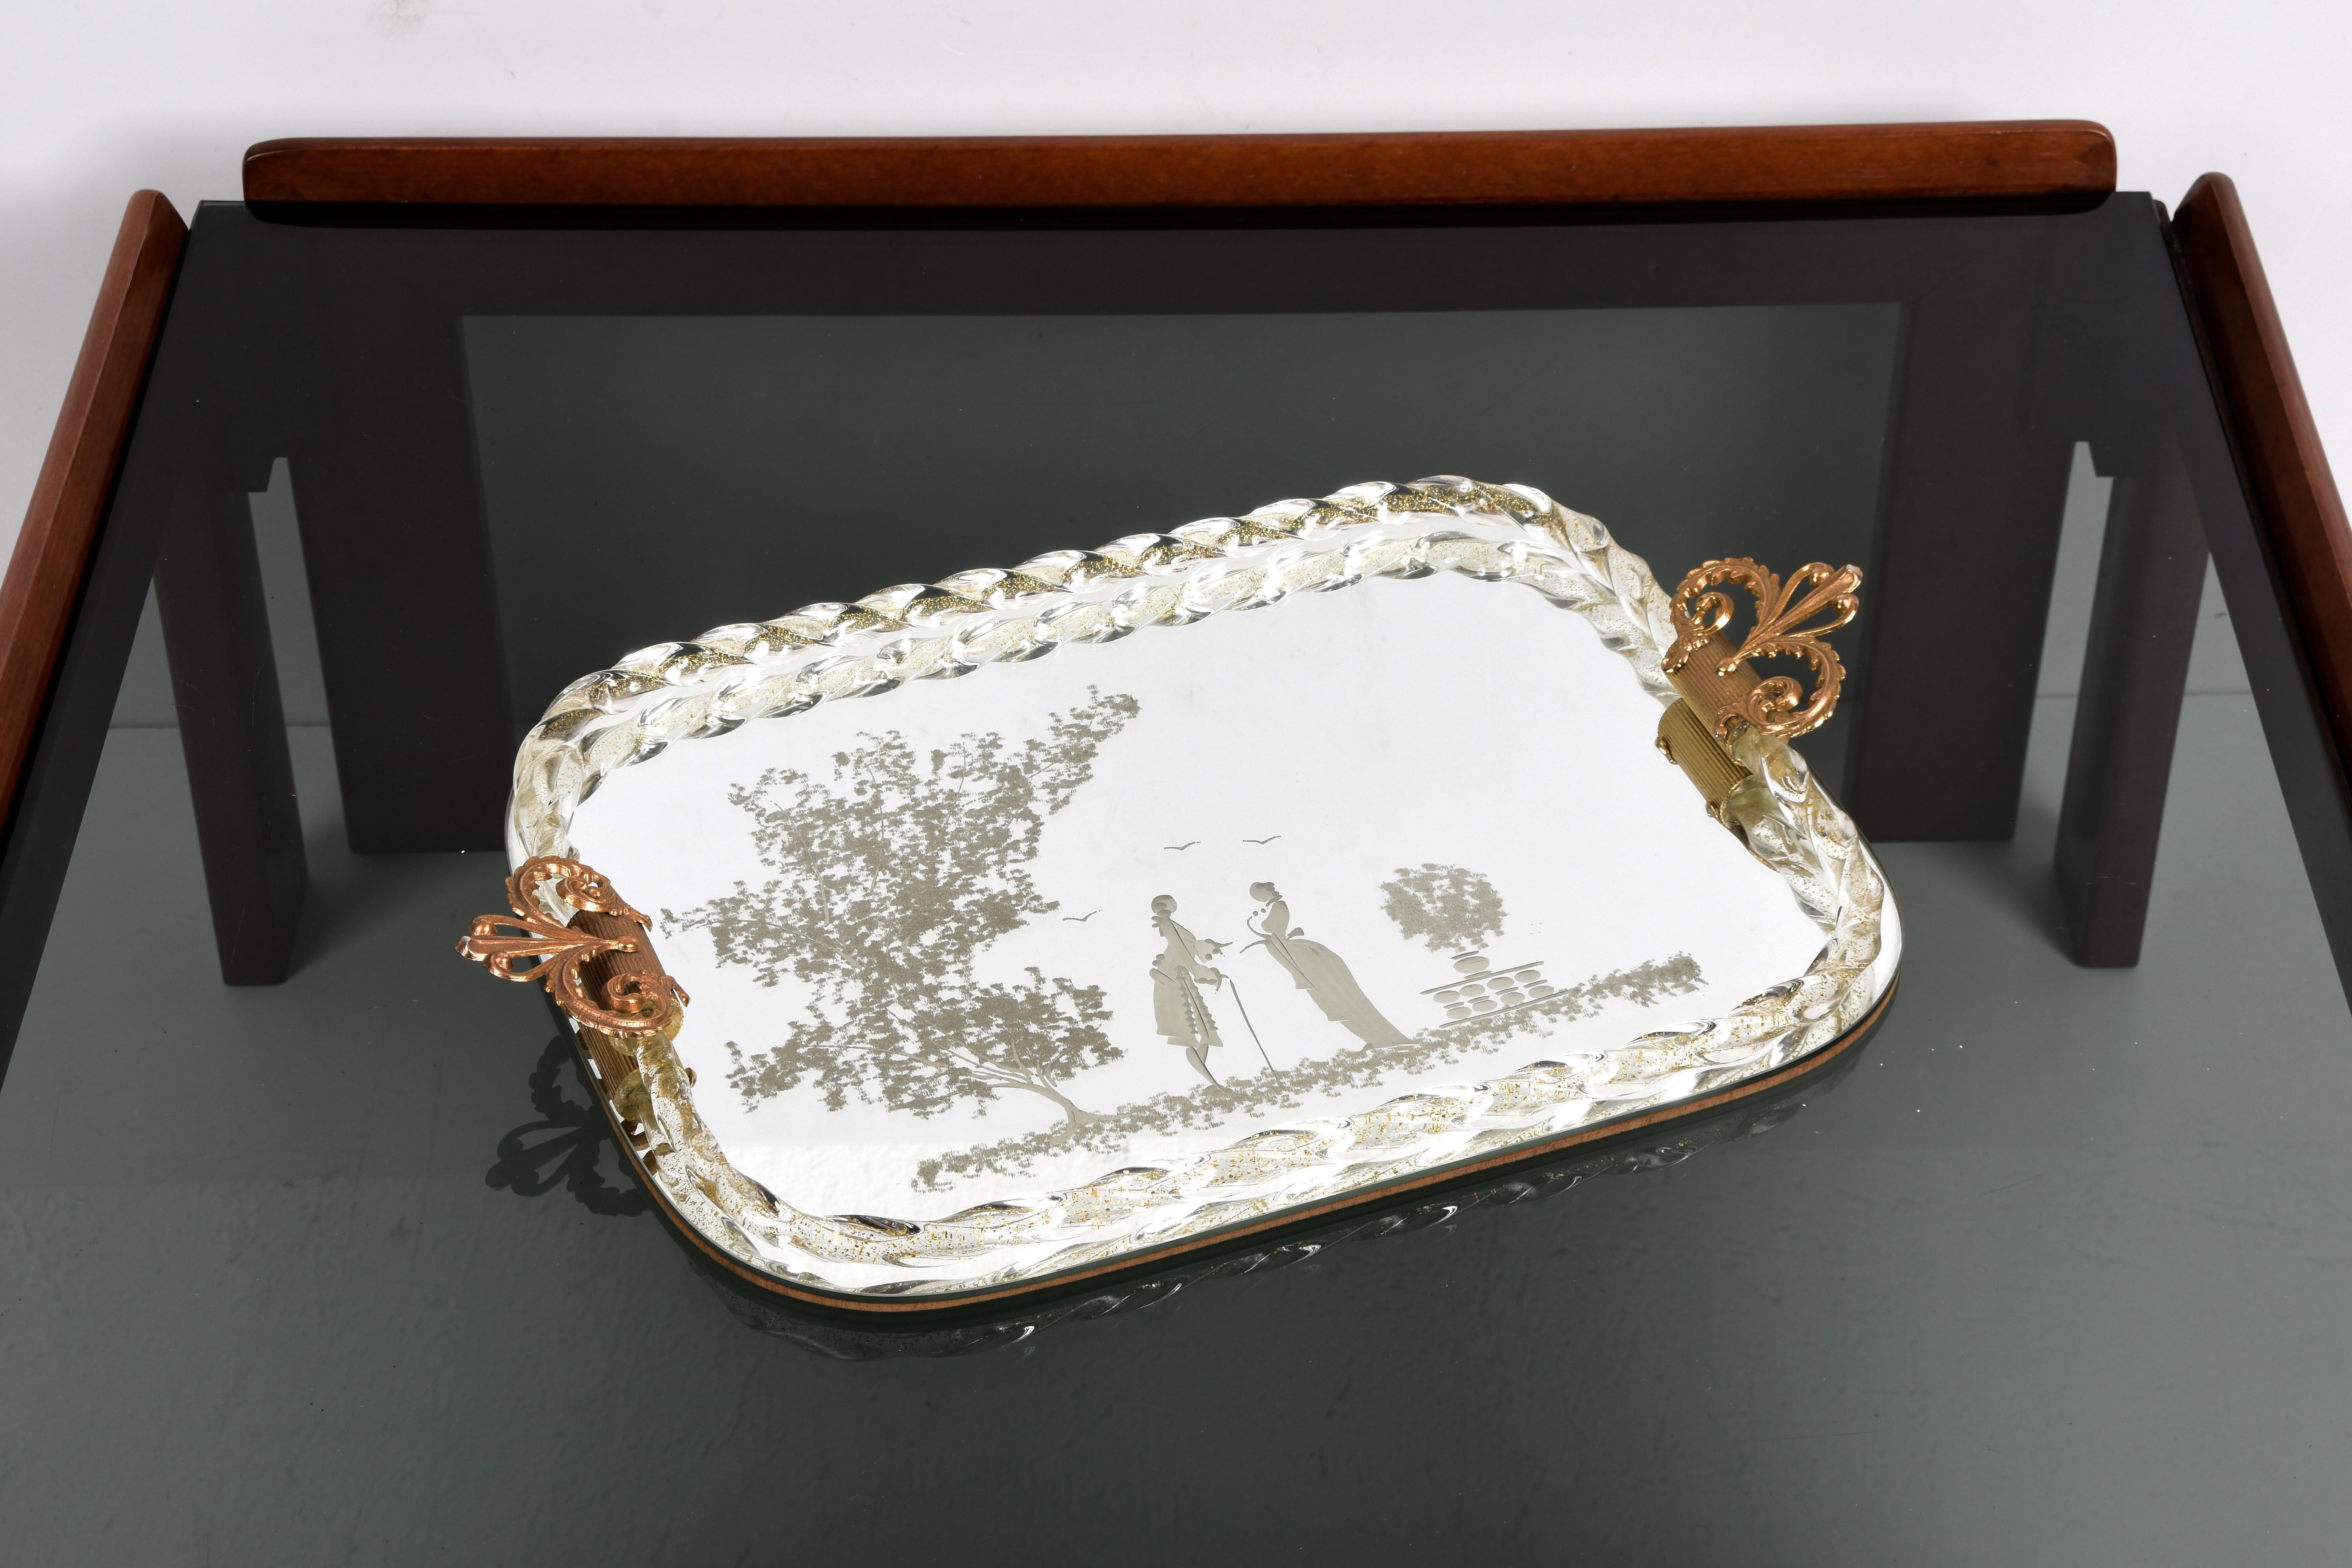 Midcentury mirror-engraved Murano glass serving tray. This wonderful piece was produced in Italy during 1940s by the master Murano glass-maker of Ercole Barovier.

This wonderful item is a peculiar Venetian vintage tray with a mirror base and